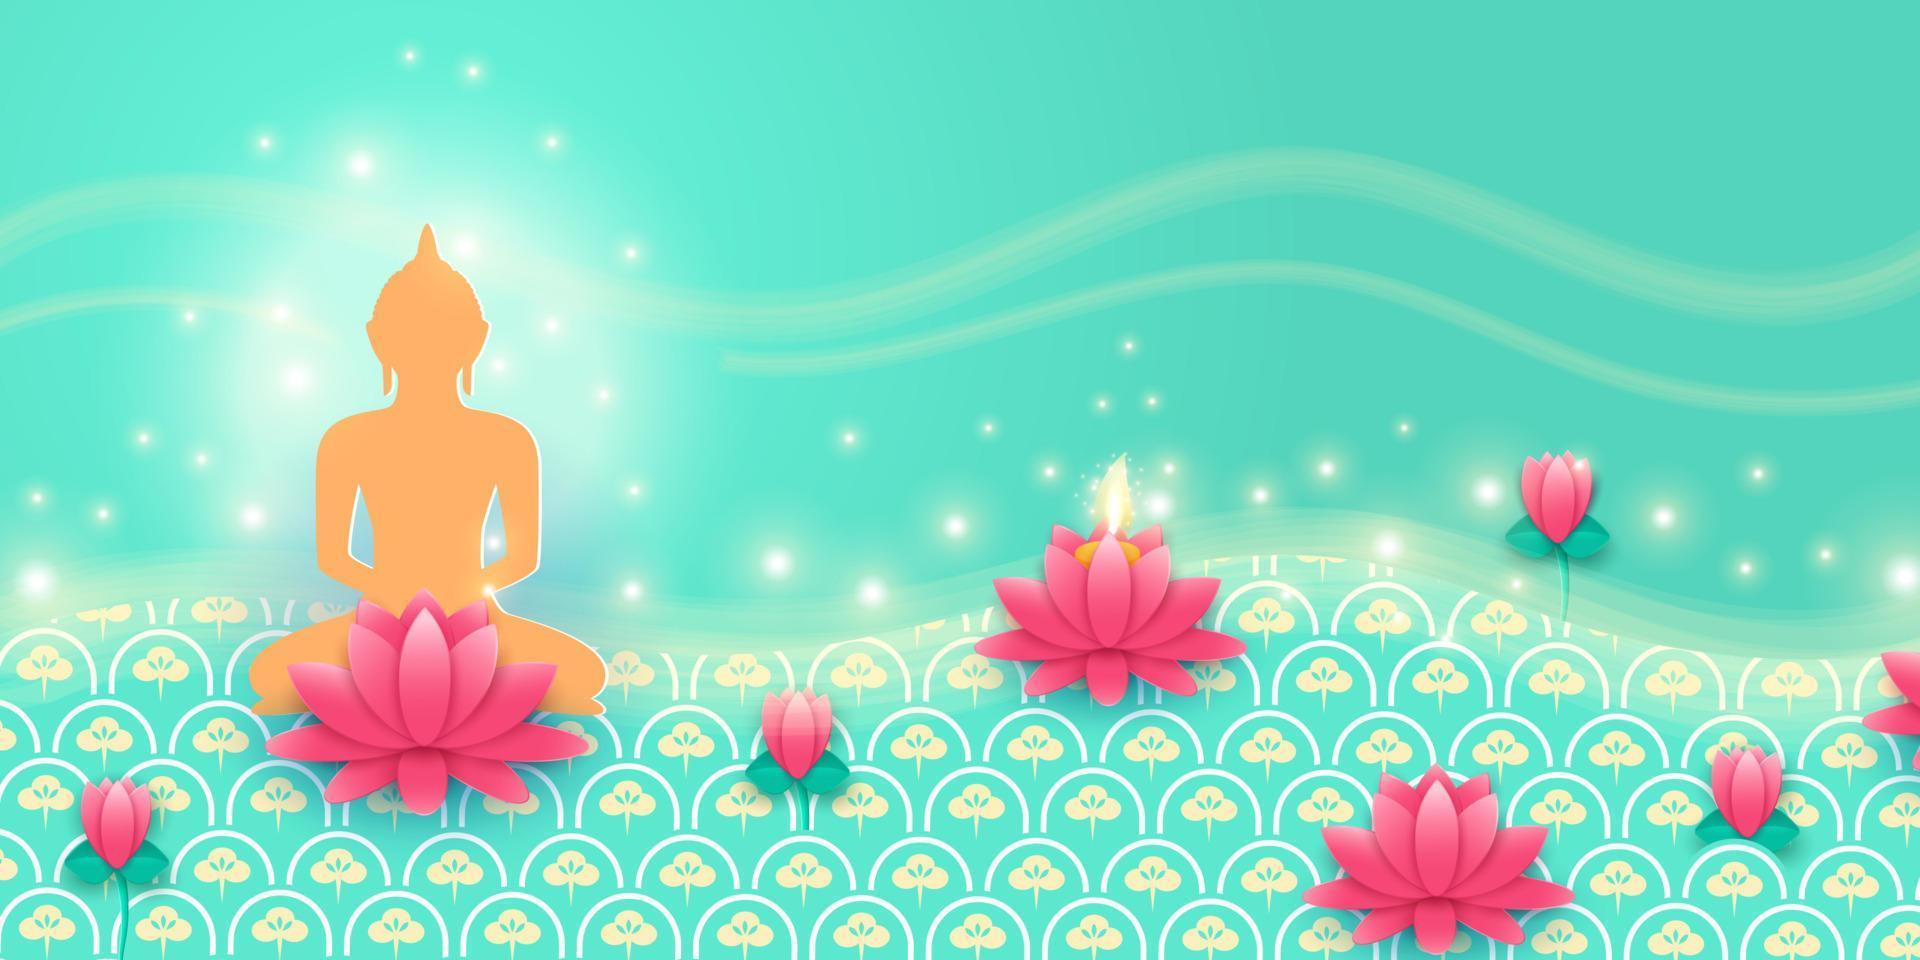 Happy Vesak Day, Buddha Day. Banner with Buddha silhouette, lotus, lights and patterns. Vector illustration